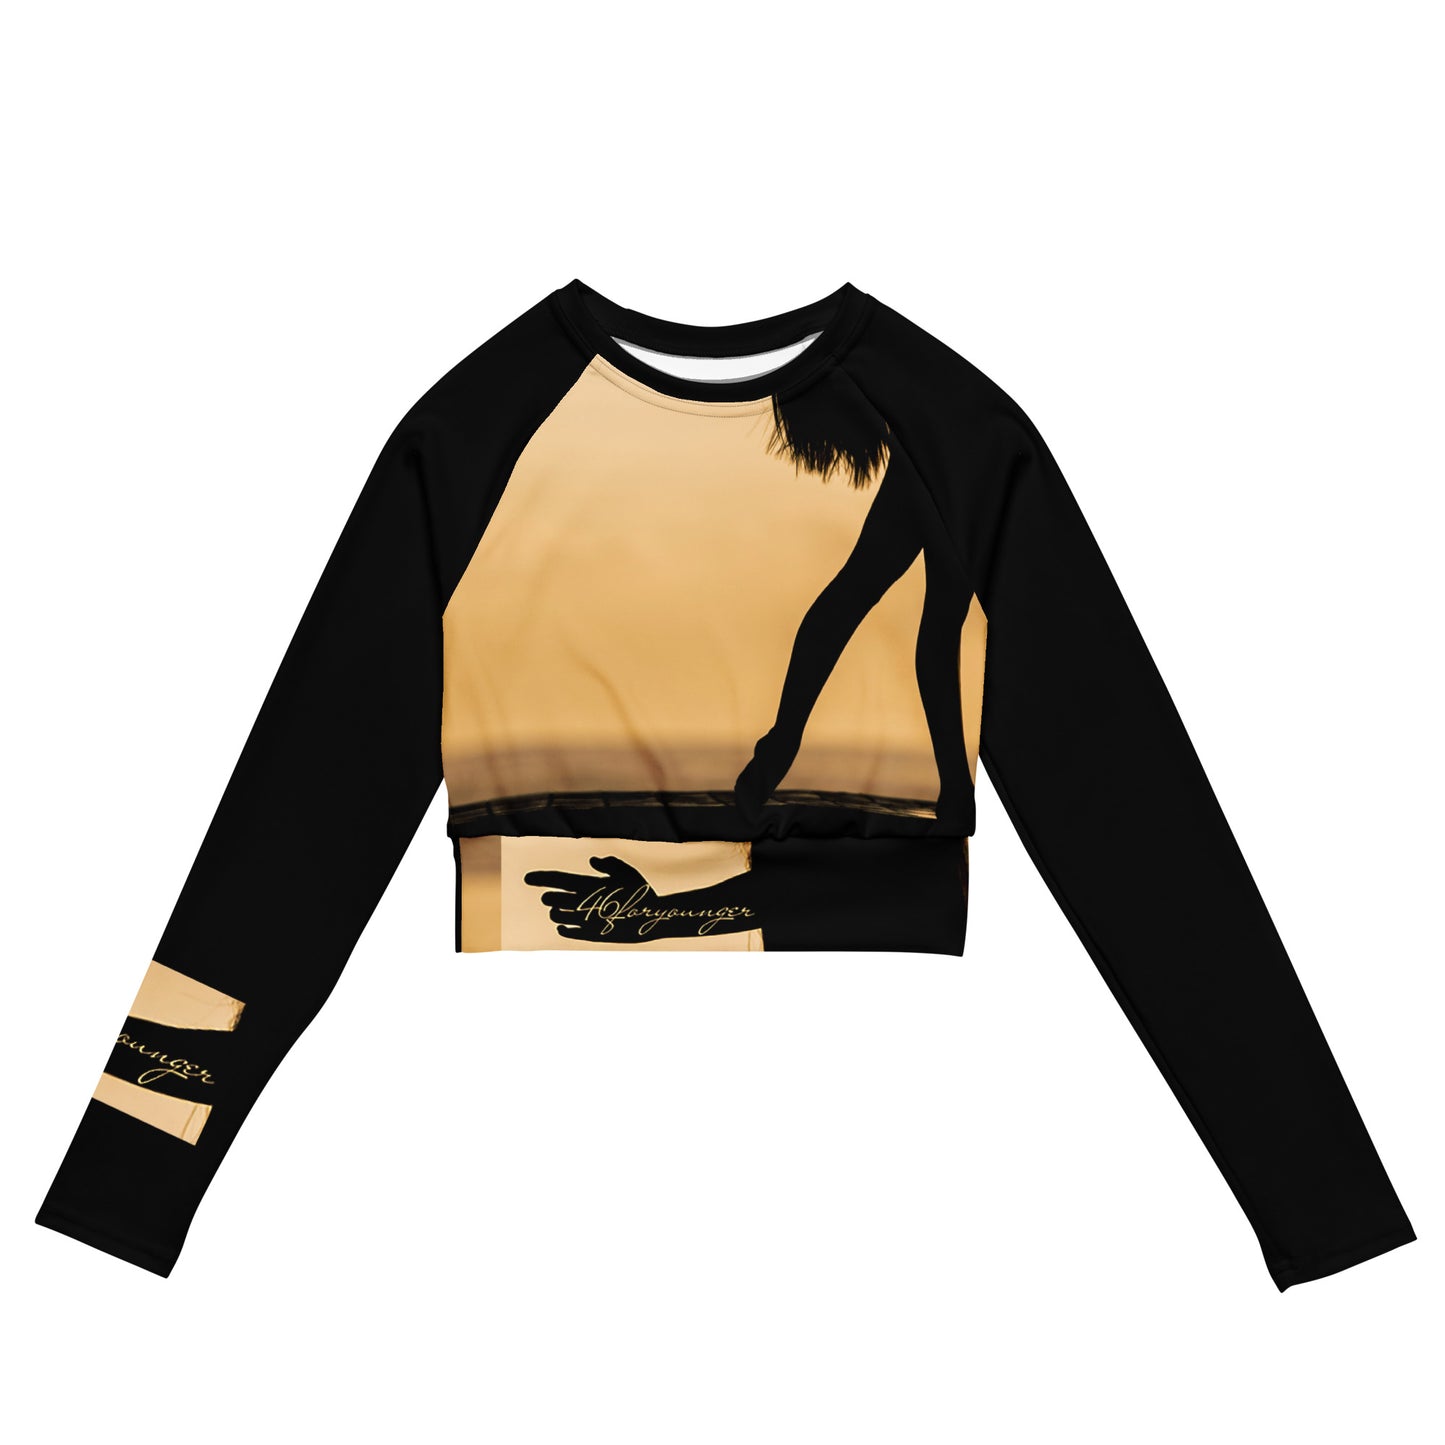 A-Ray of Emotions Long-Sleeve Crop Top - Bracelet - Plus Size